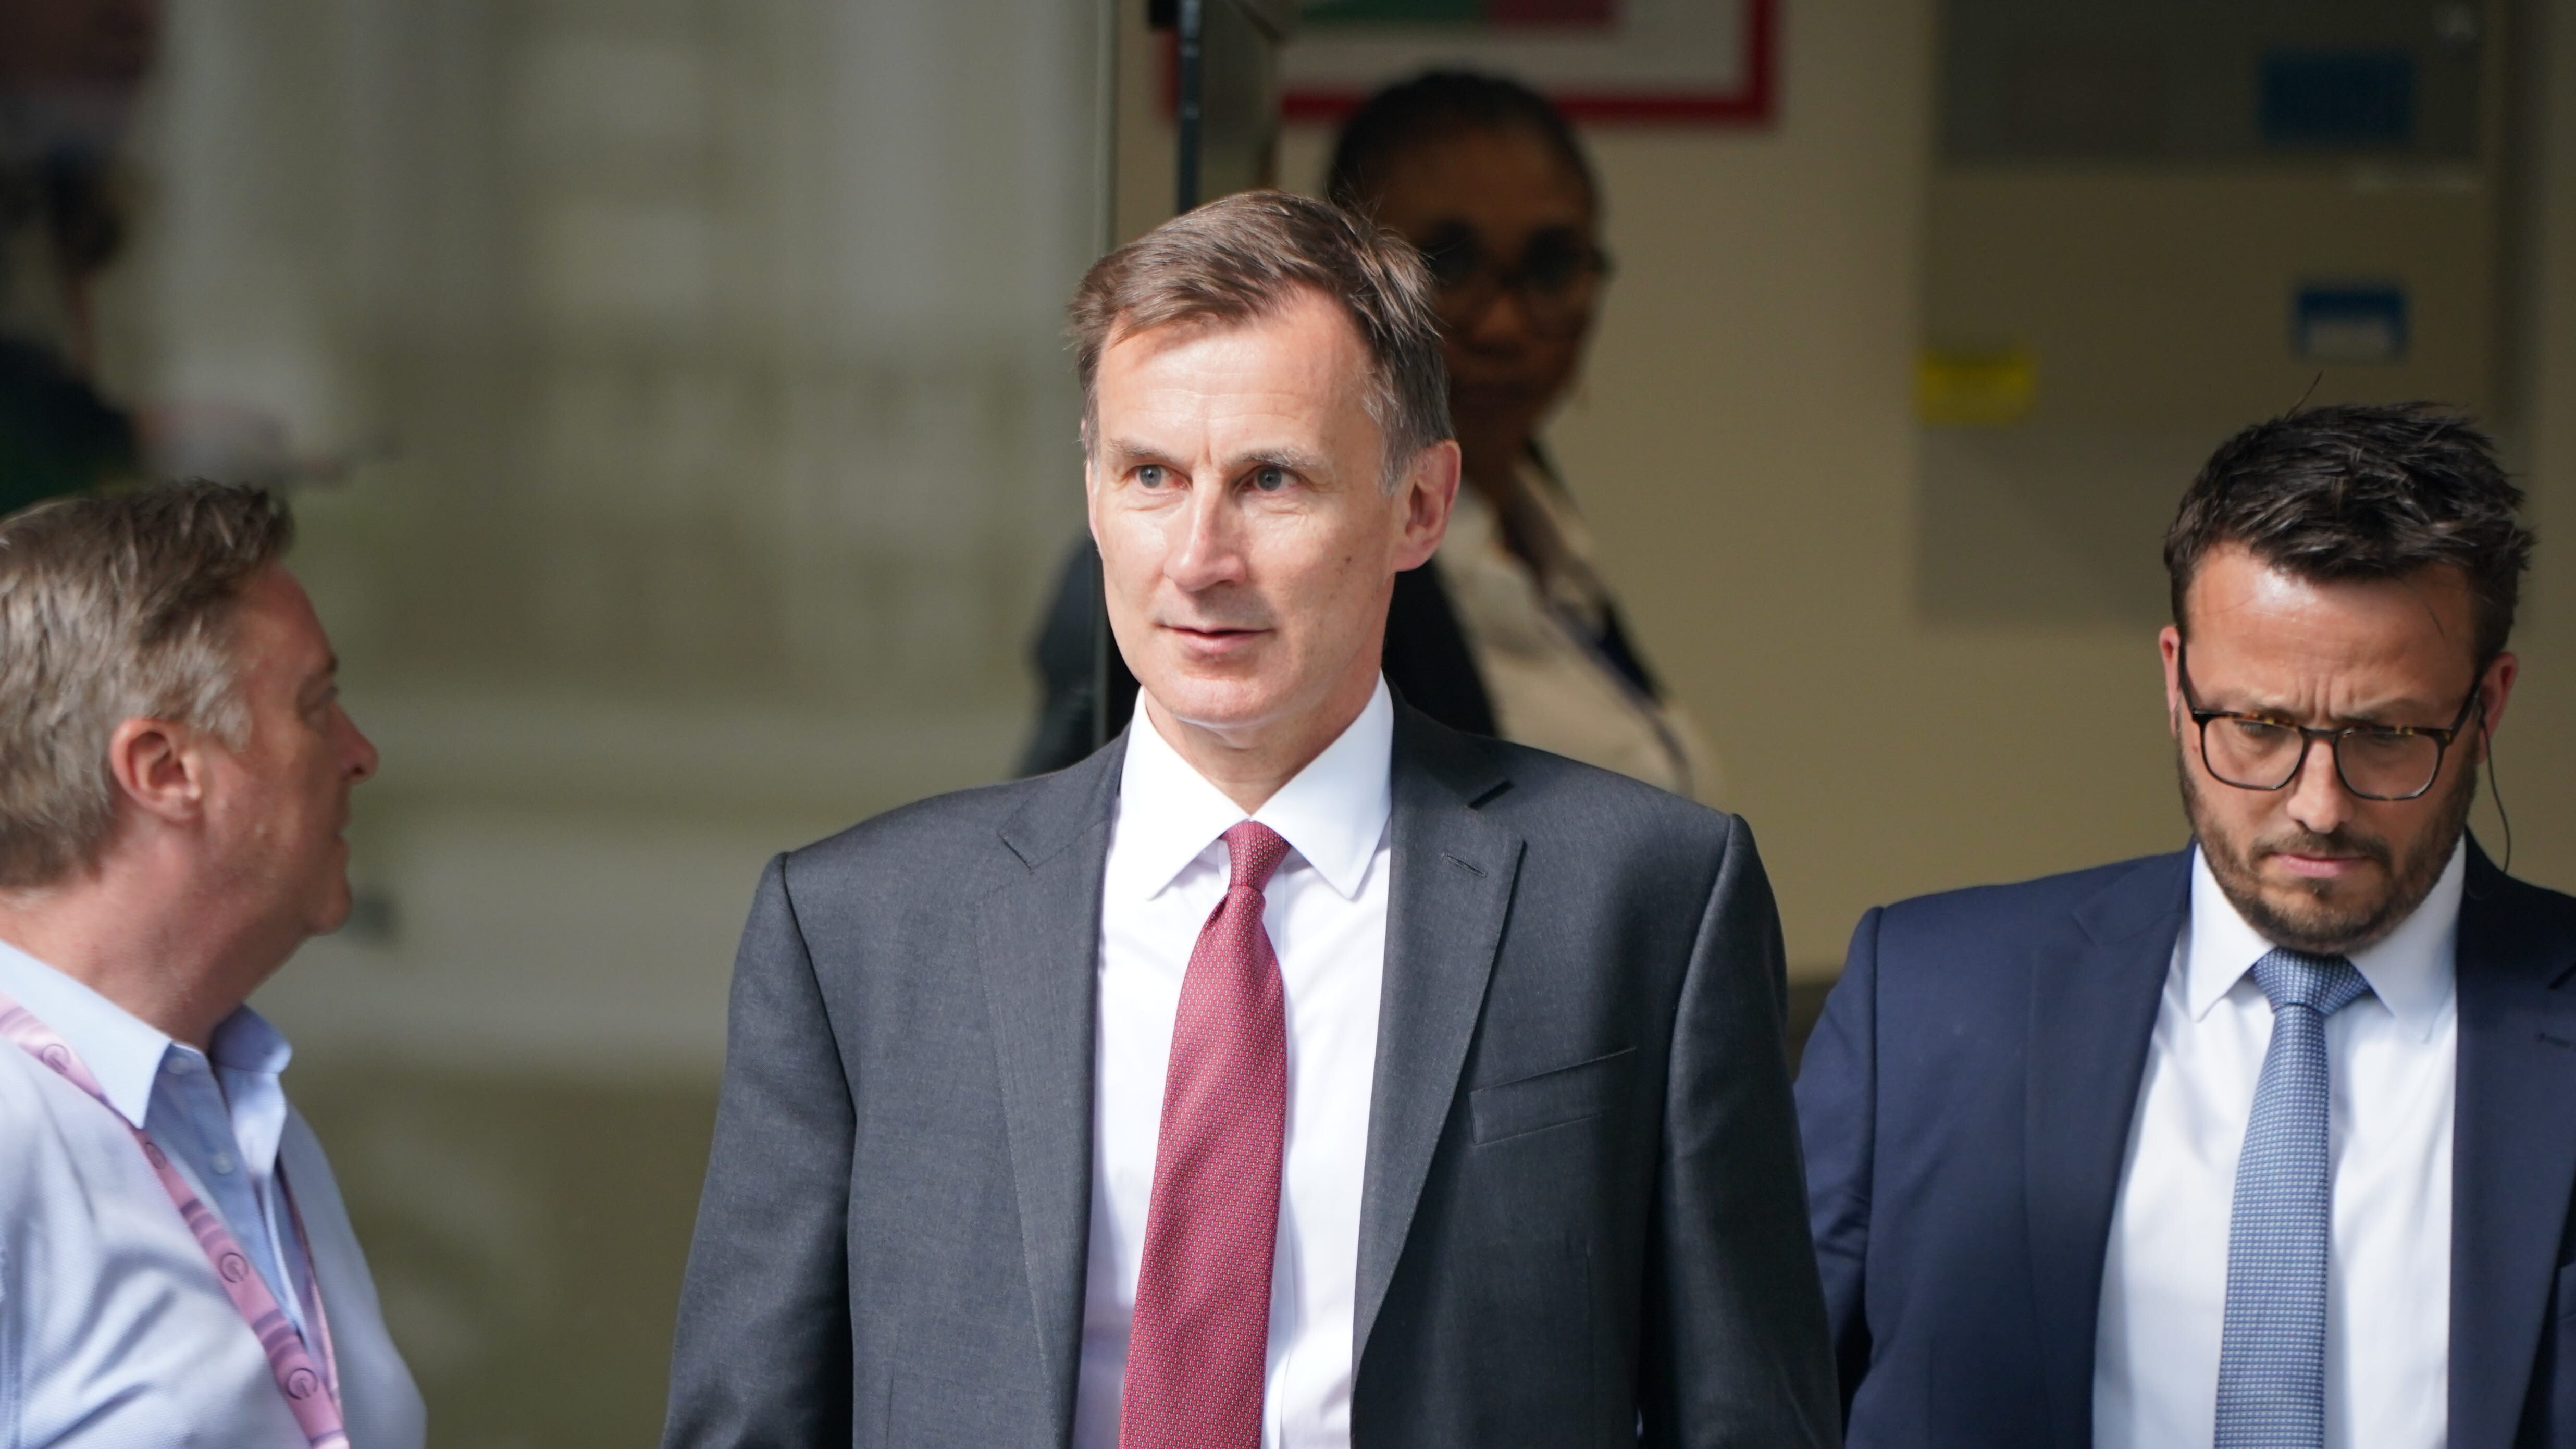 Chancellor of the Exchequer Jeremy Hunt is prioritising bringing down inflation over tax cuts (Lucy North/PA)